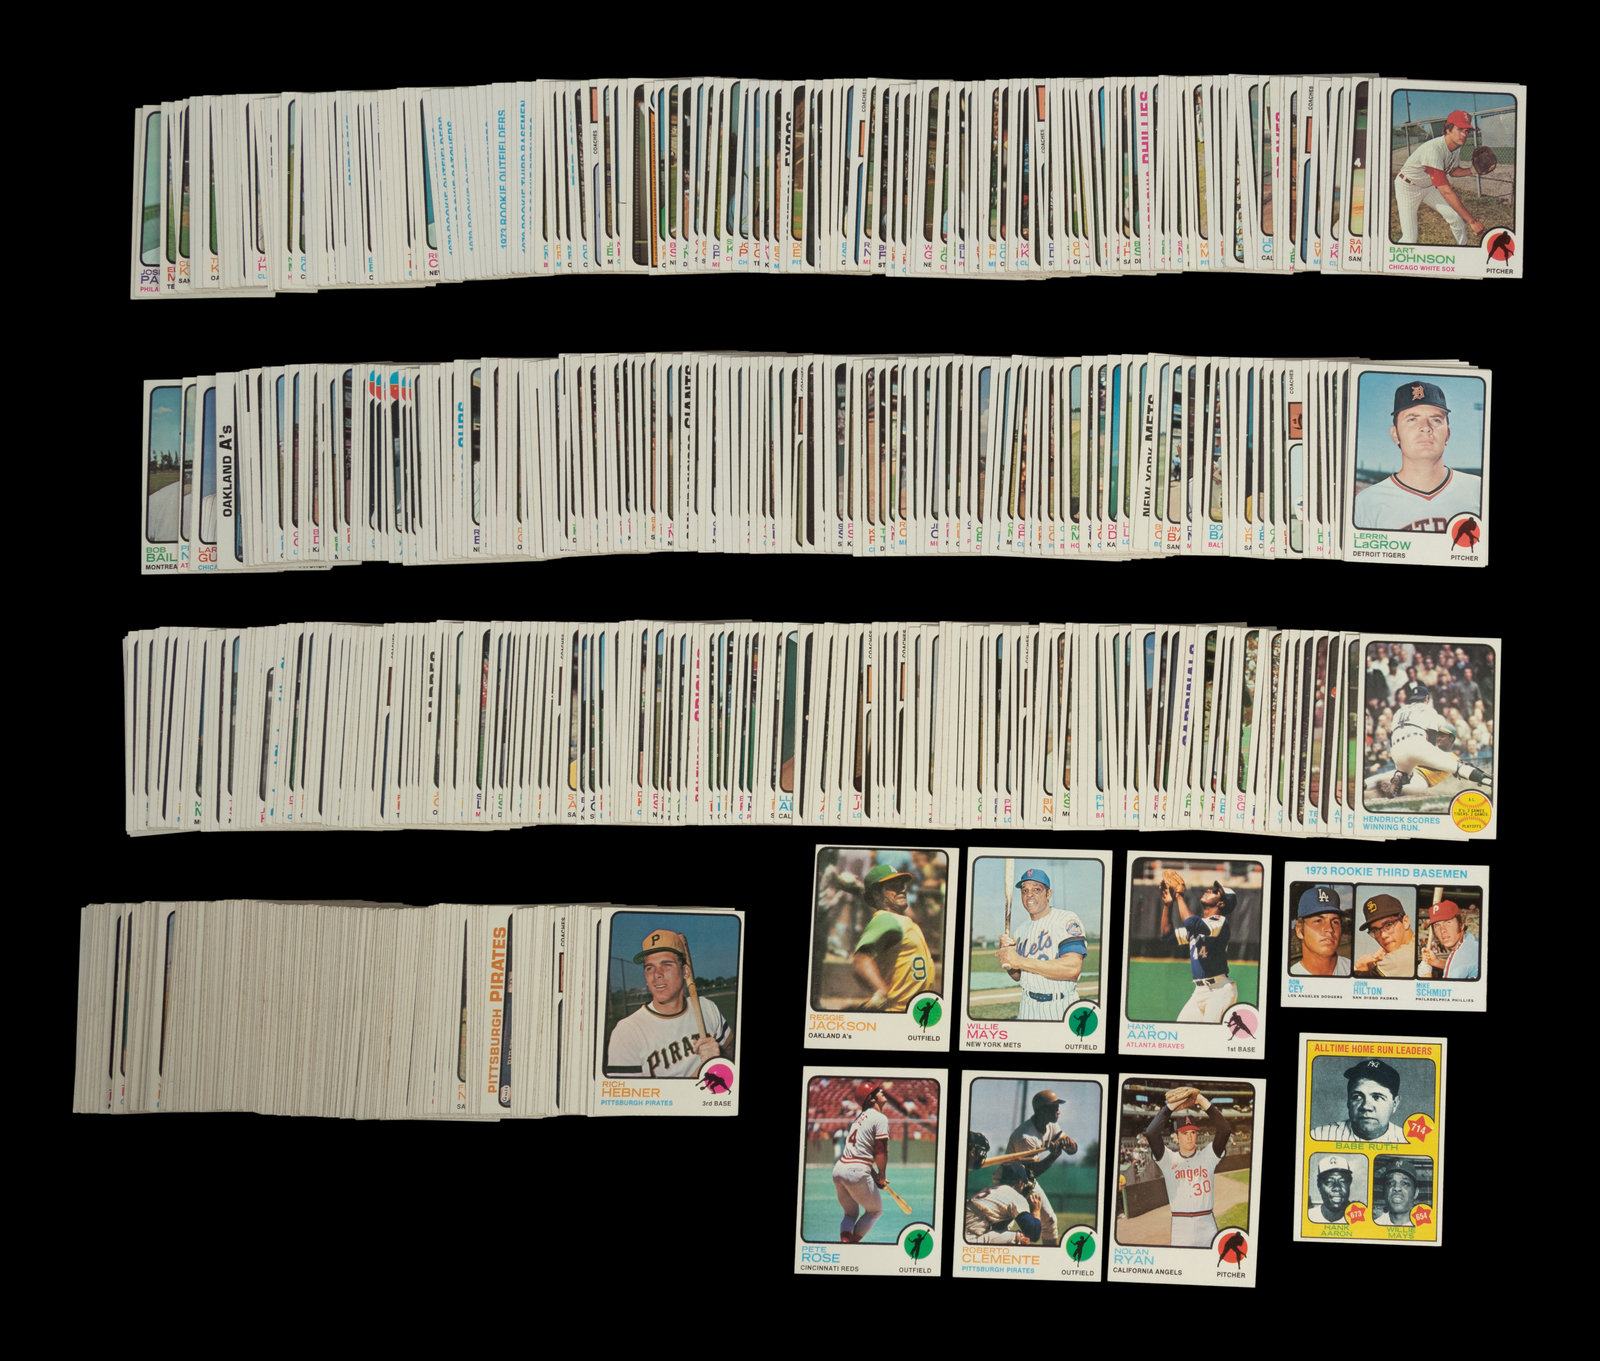 Sold at Auction: 1973 Topps Baseball Card Complete Set of 660